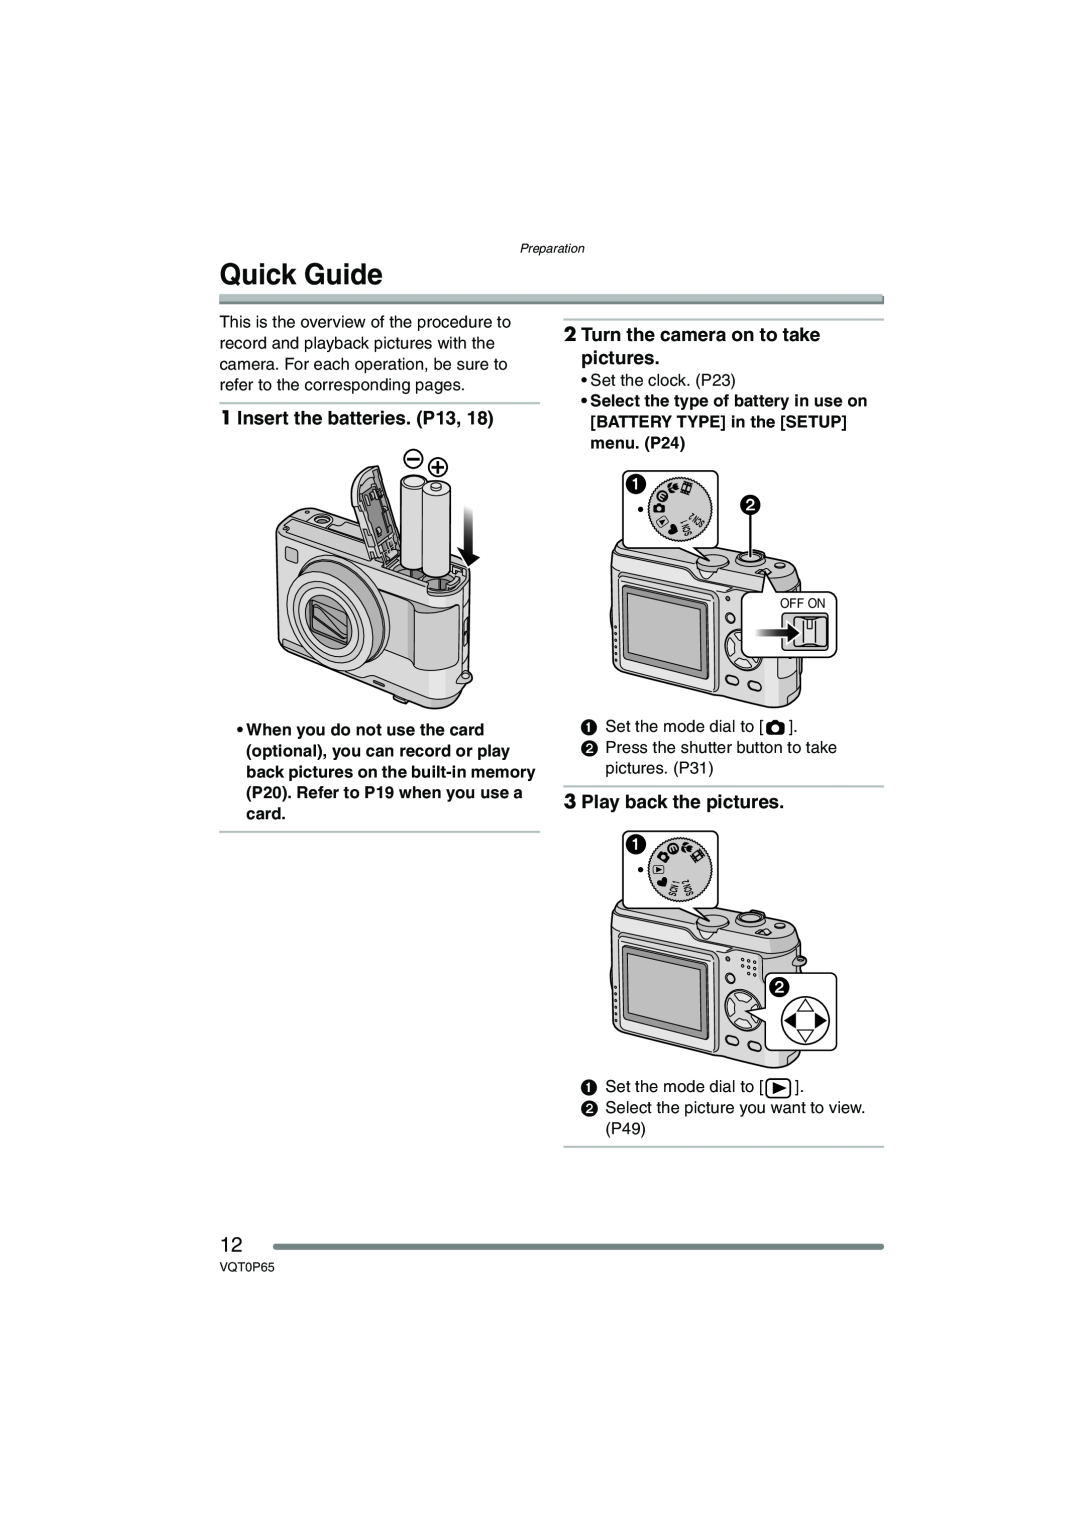 Panasonic DMC-LZ2PP Quick Guide, Insert the batteries. P13, Turn the camera on to take pictures, Play back the pictures 